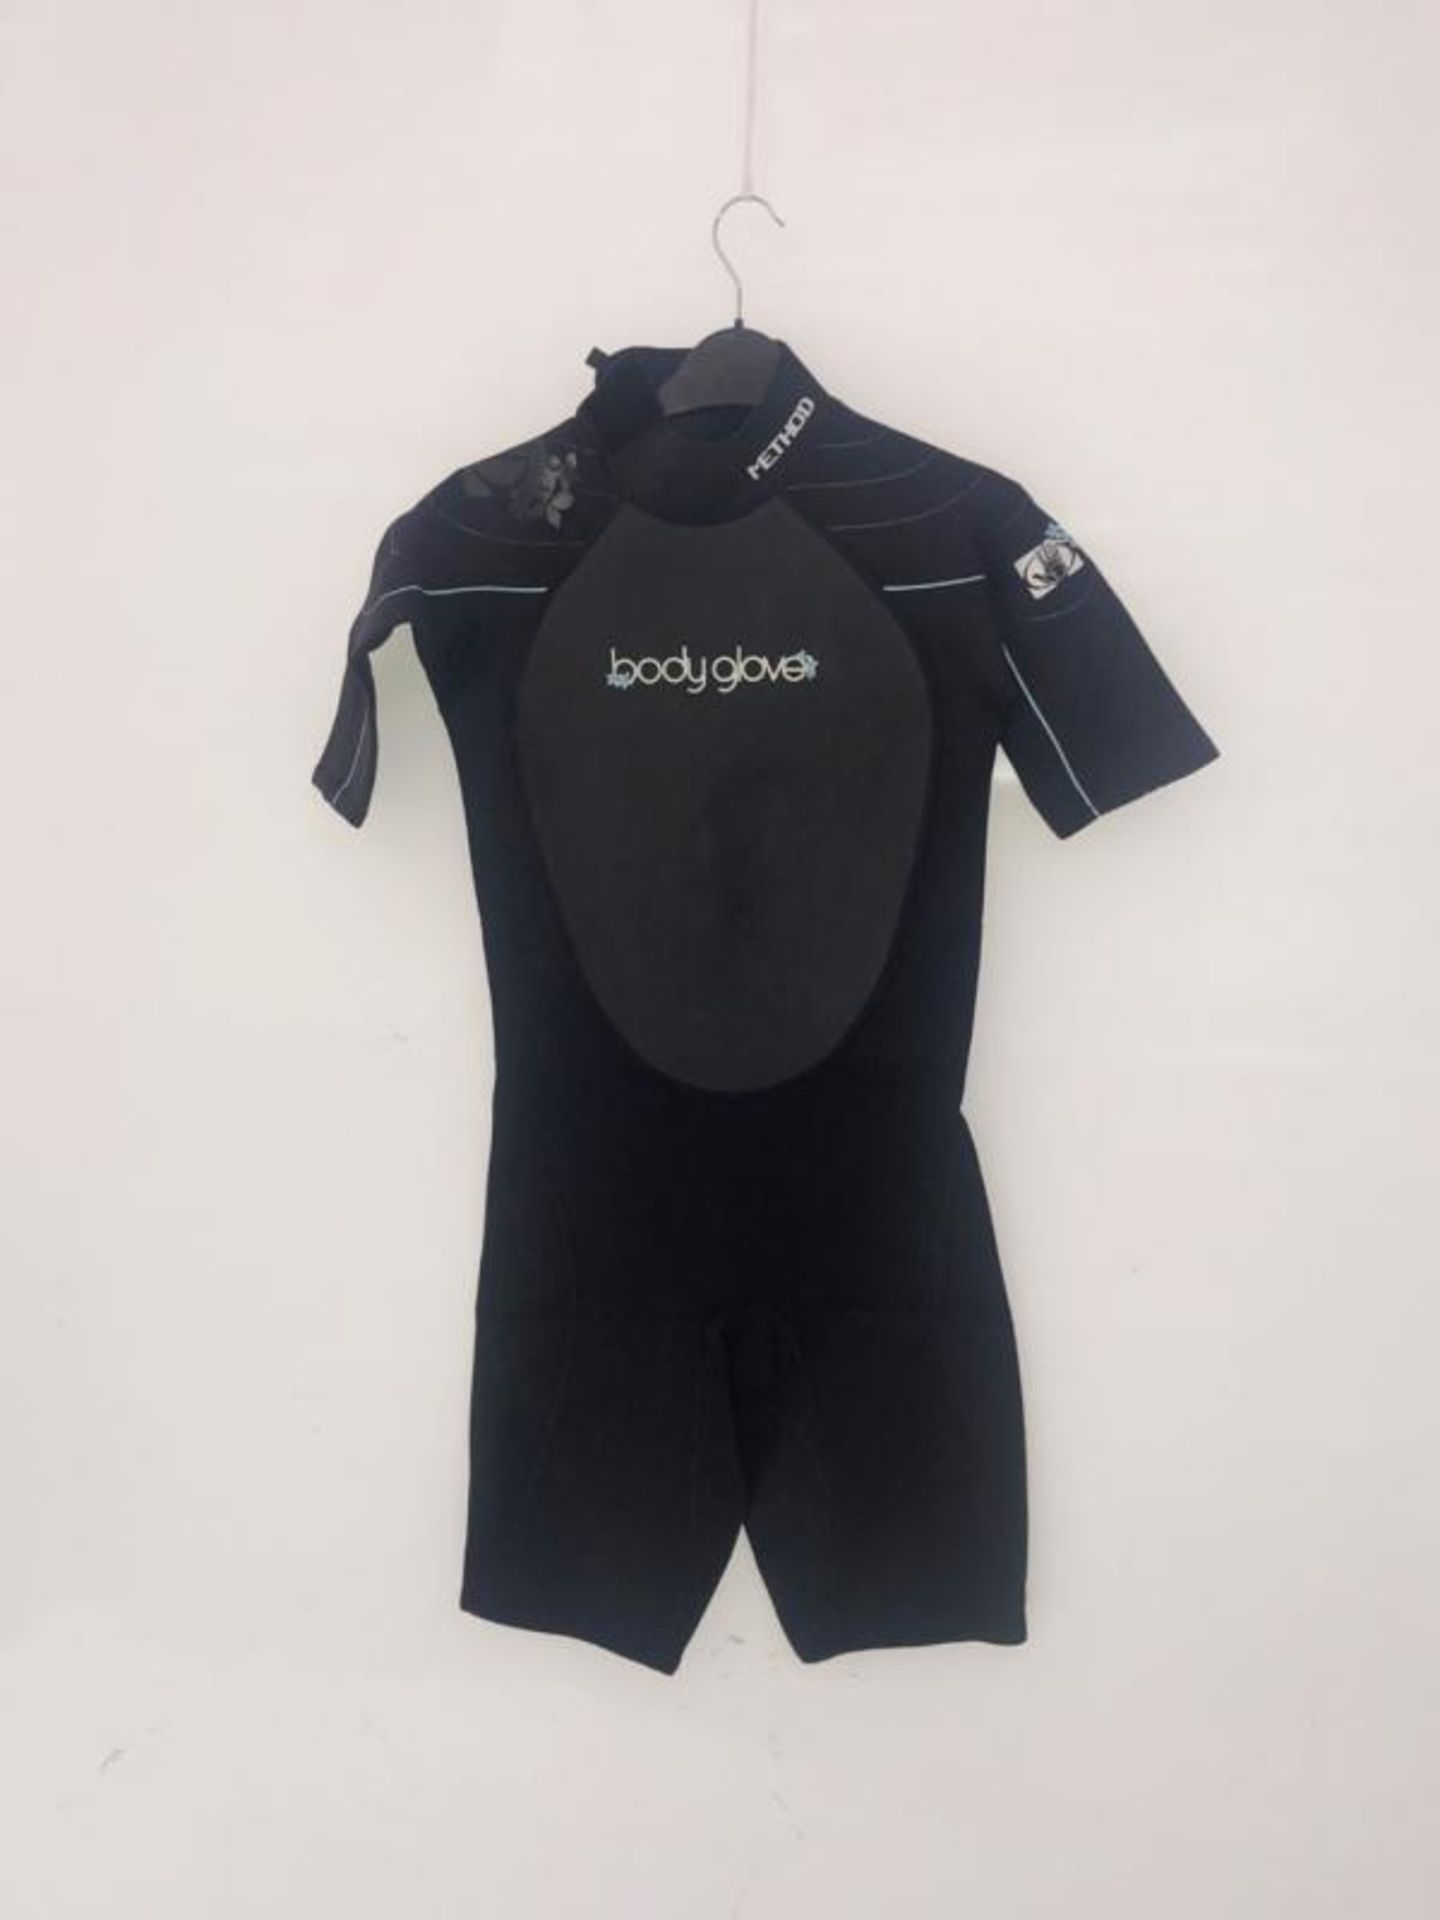 4 x New Body Glove Method Shortie Ladies Wetsuit's - Ref RB136, RB137, RB138, NS485 - CL349 - Altri - Image 18 of 18